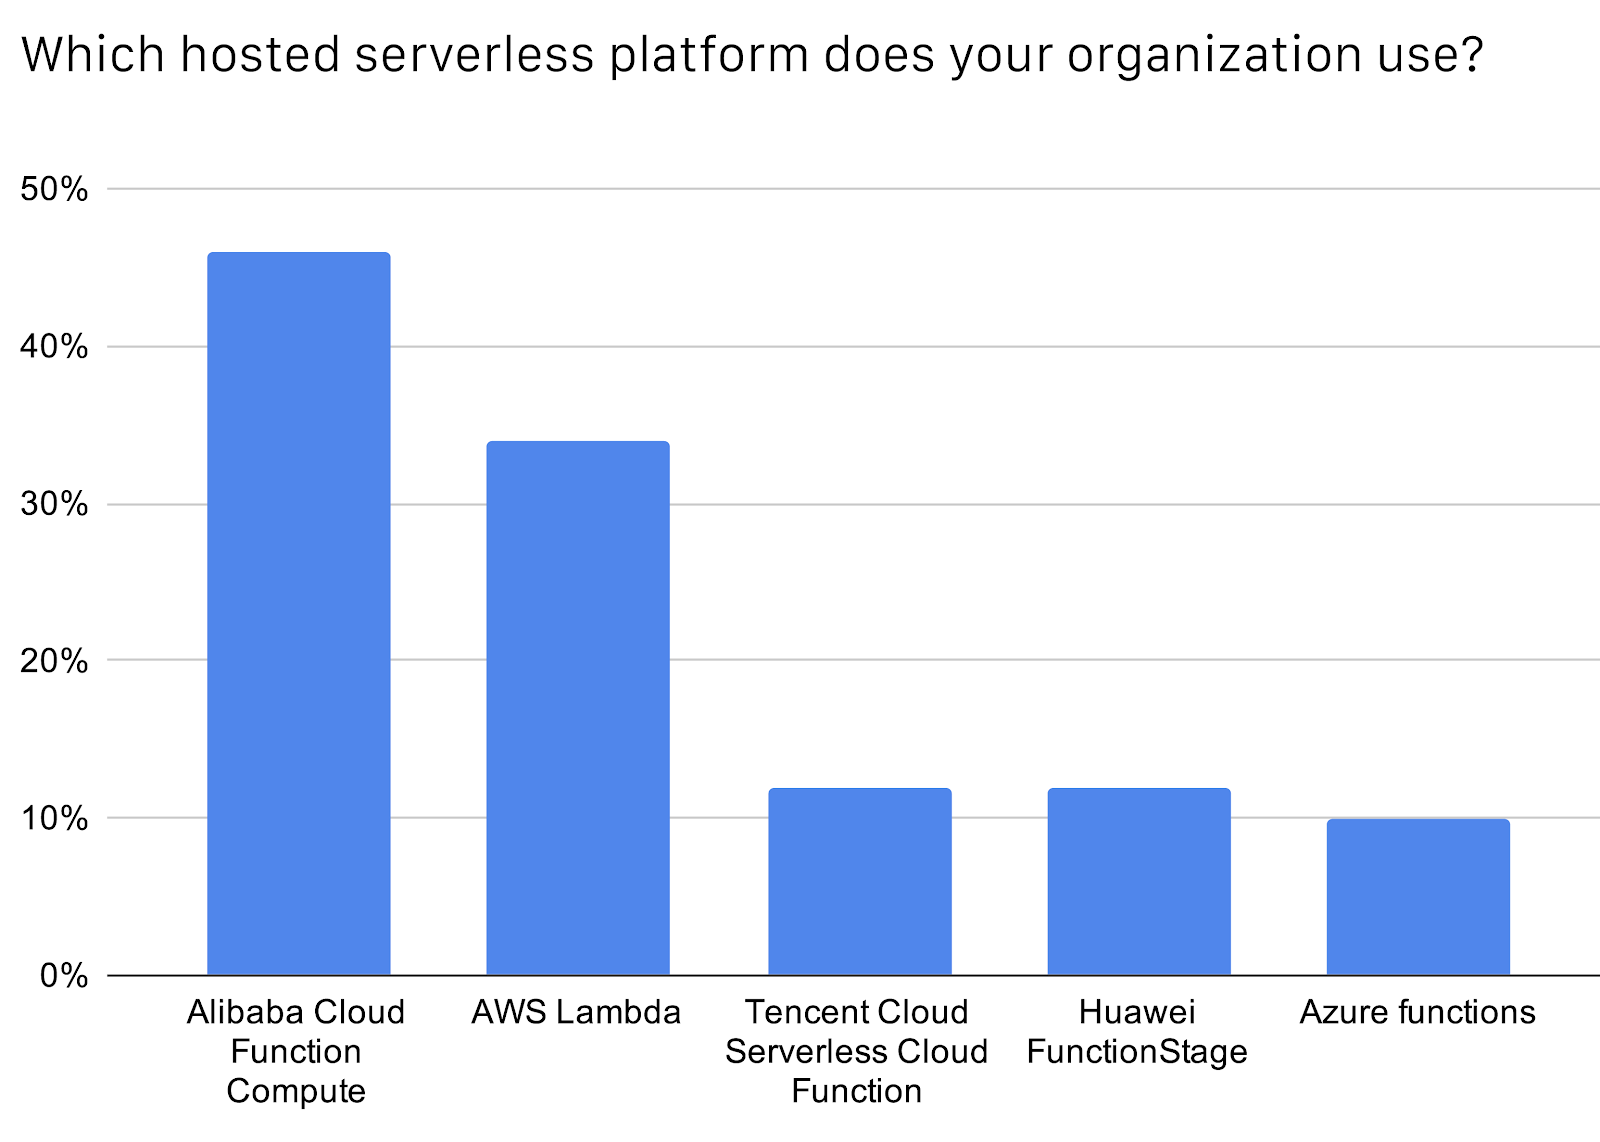 Bar chart shows hosted serverless platform used by organizations.